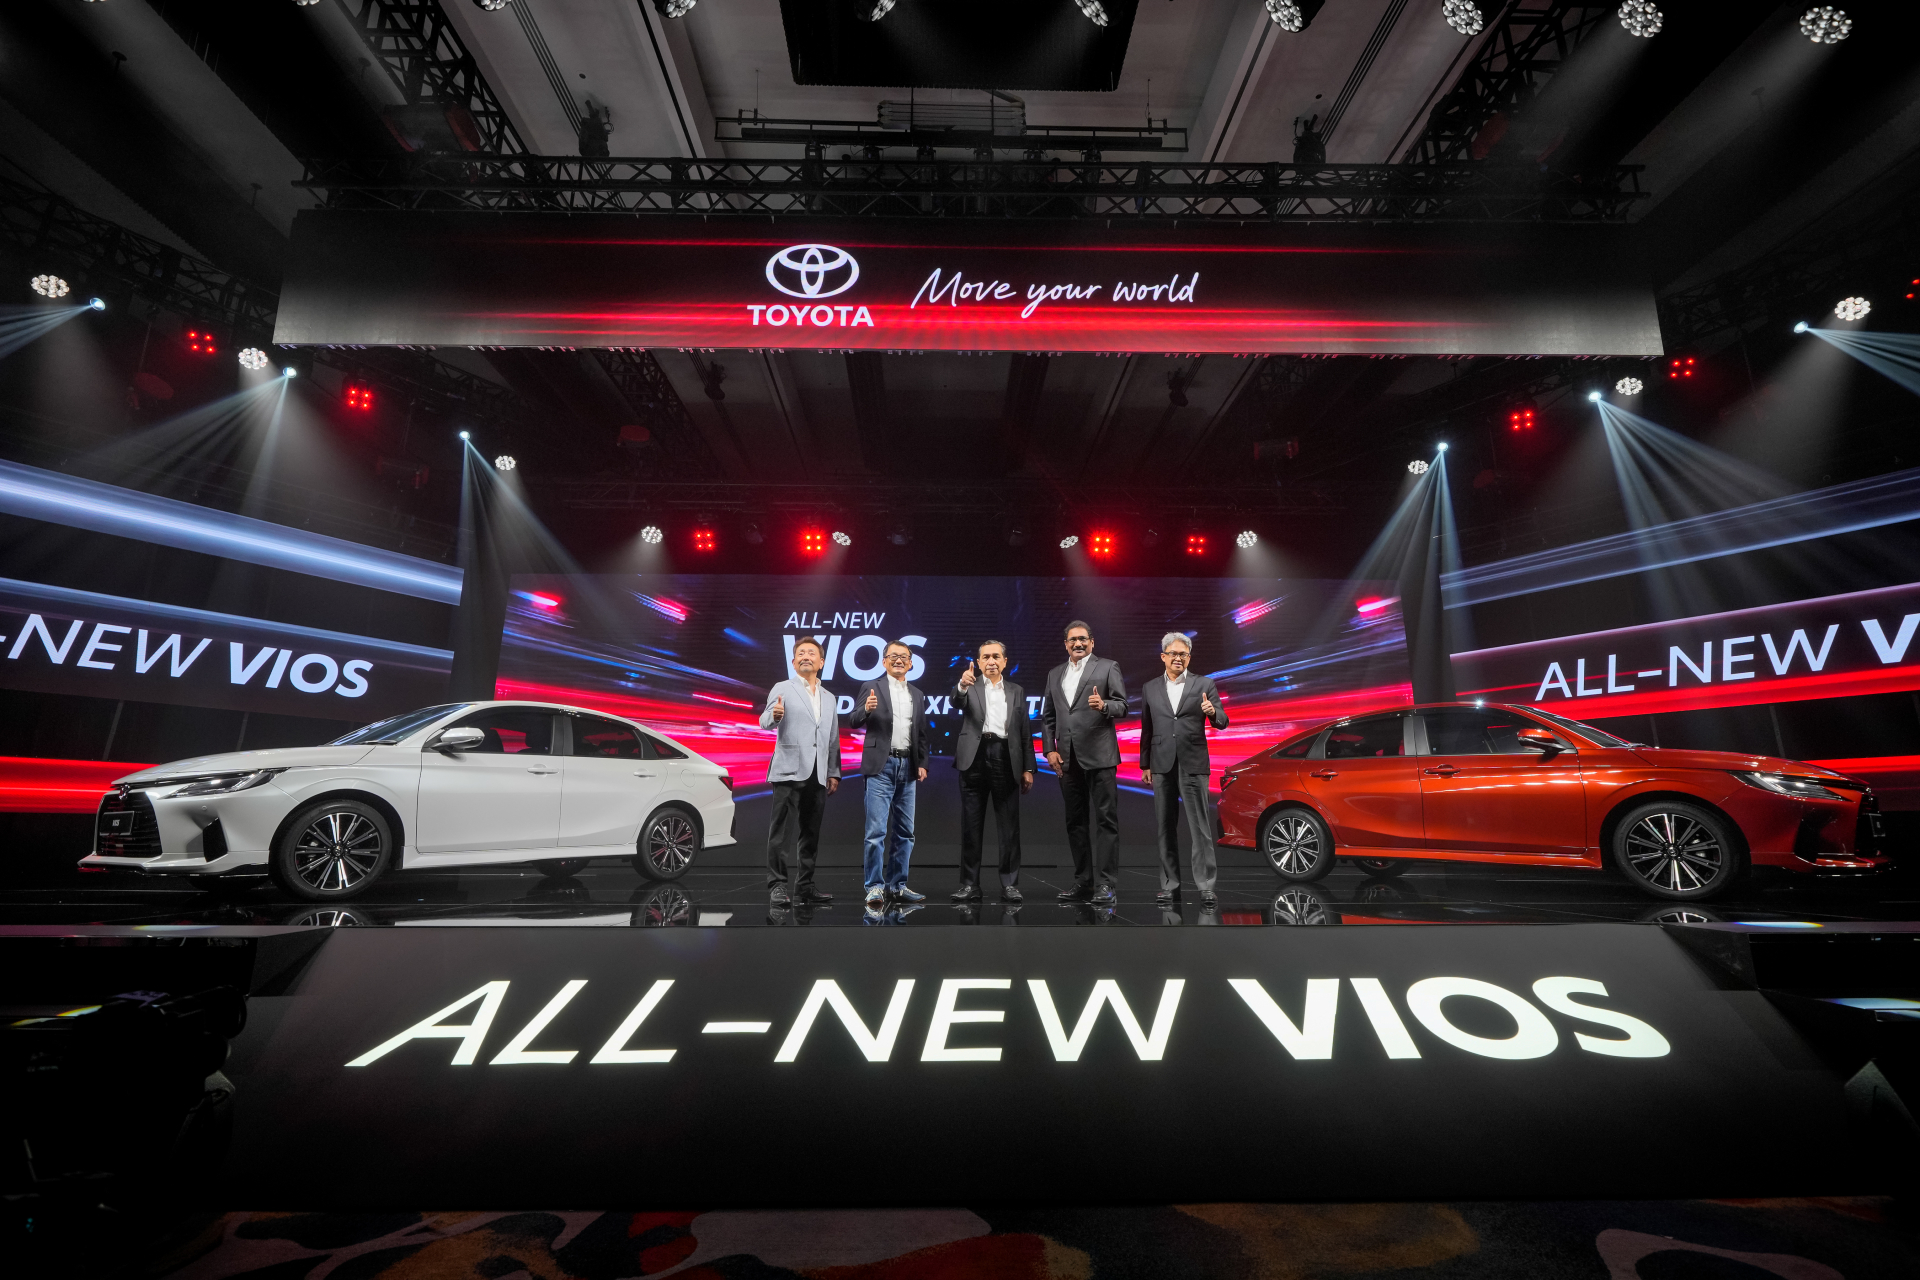 Umw Toyota Motor Launches The All New Toyota Vios With Improved Performance And New Technology | 3